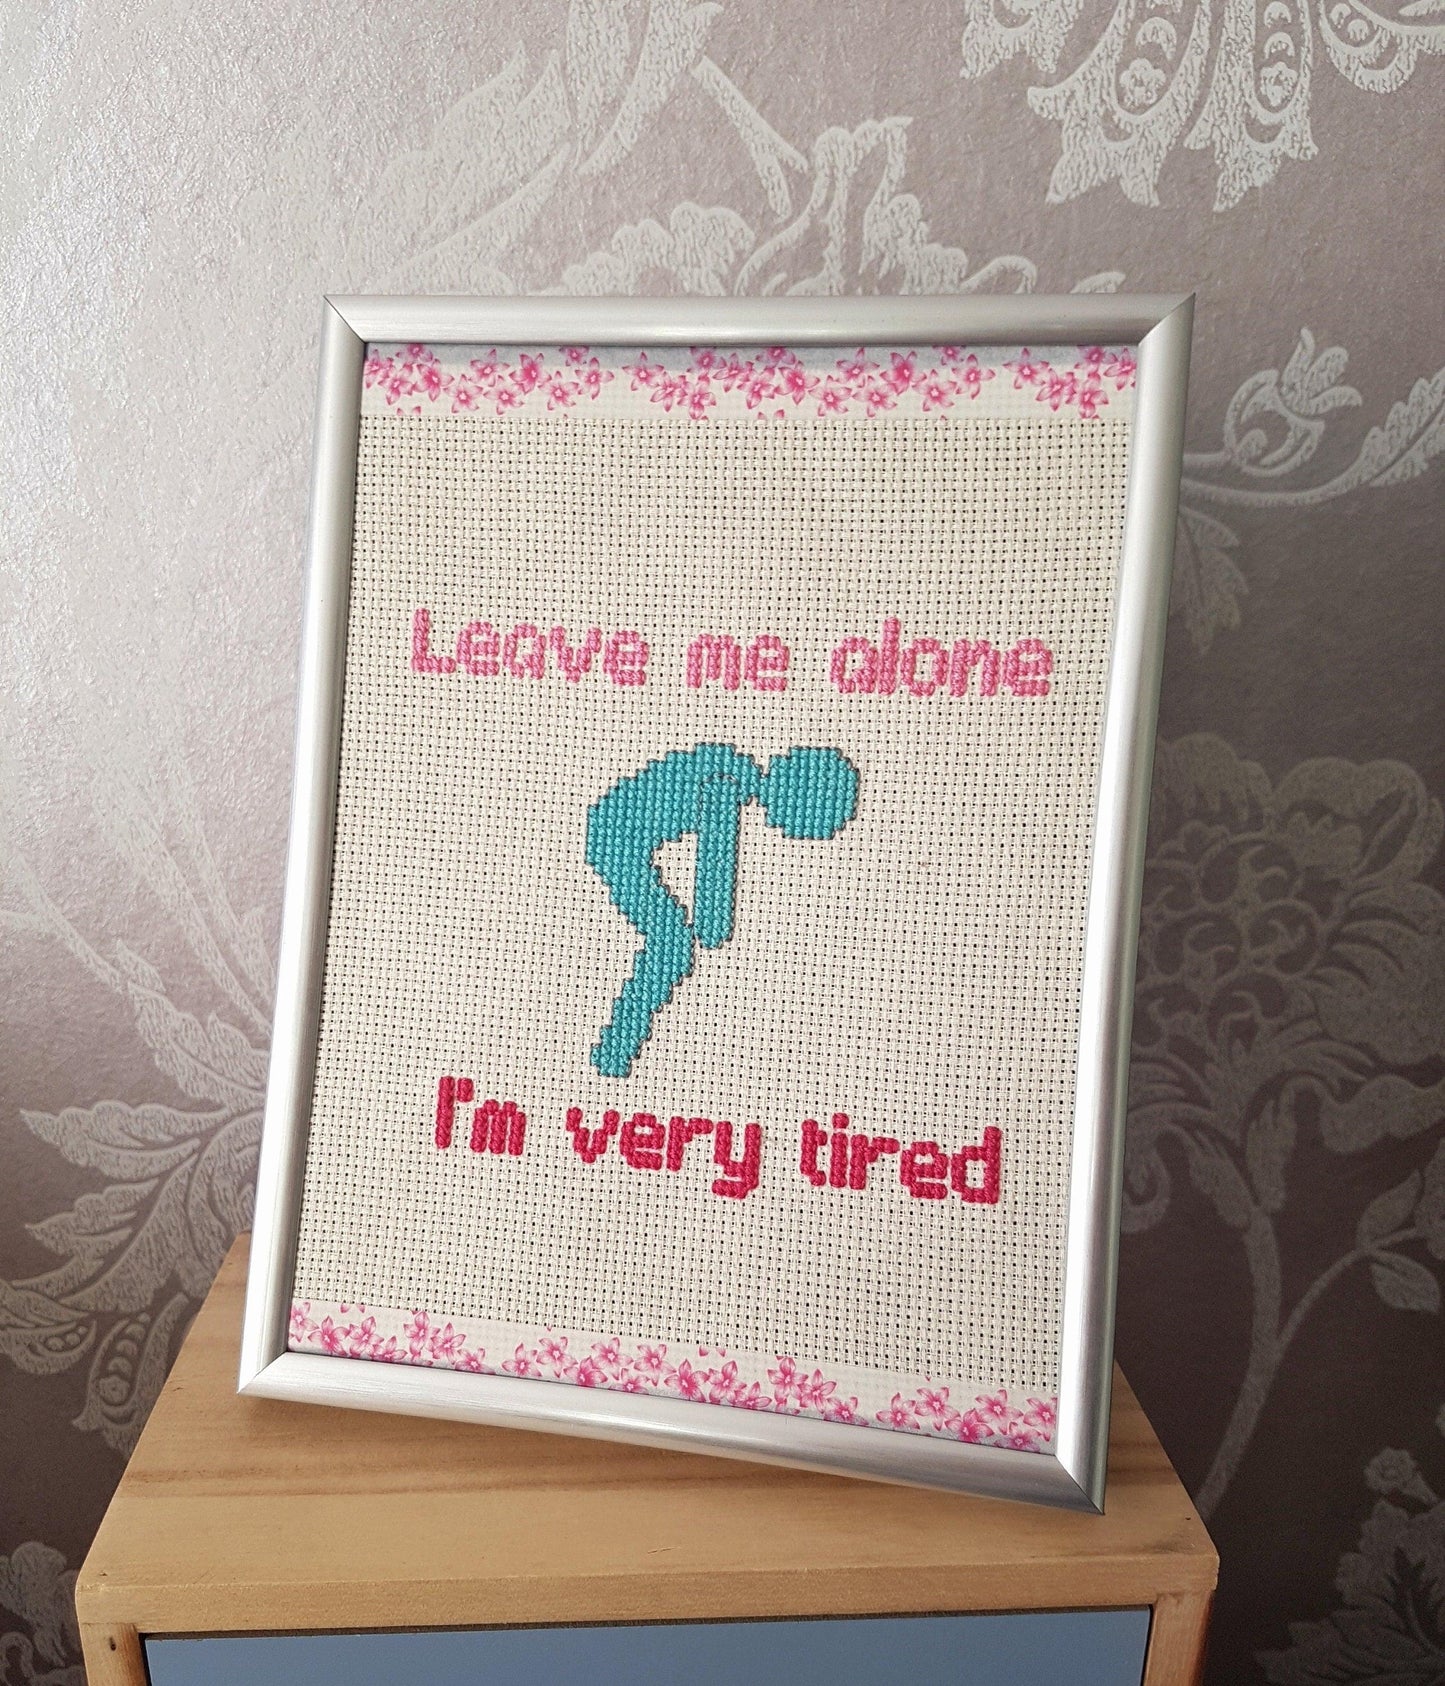 Leave me alone I'm very tired, completed cross stitch quote - Thistleflat Crafts